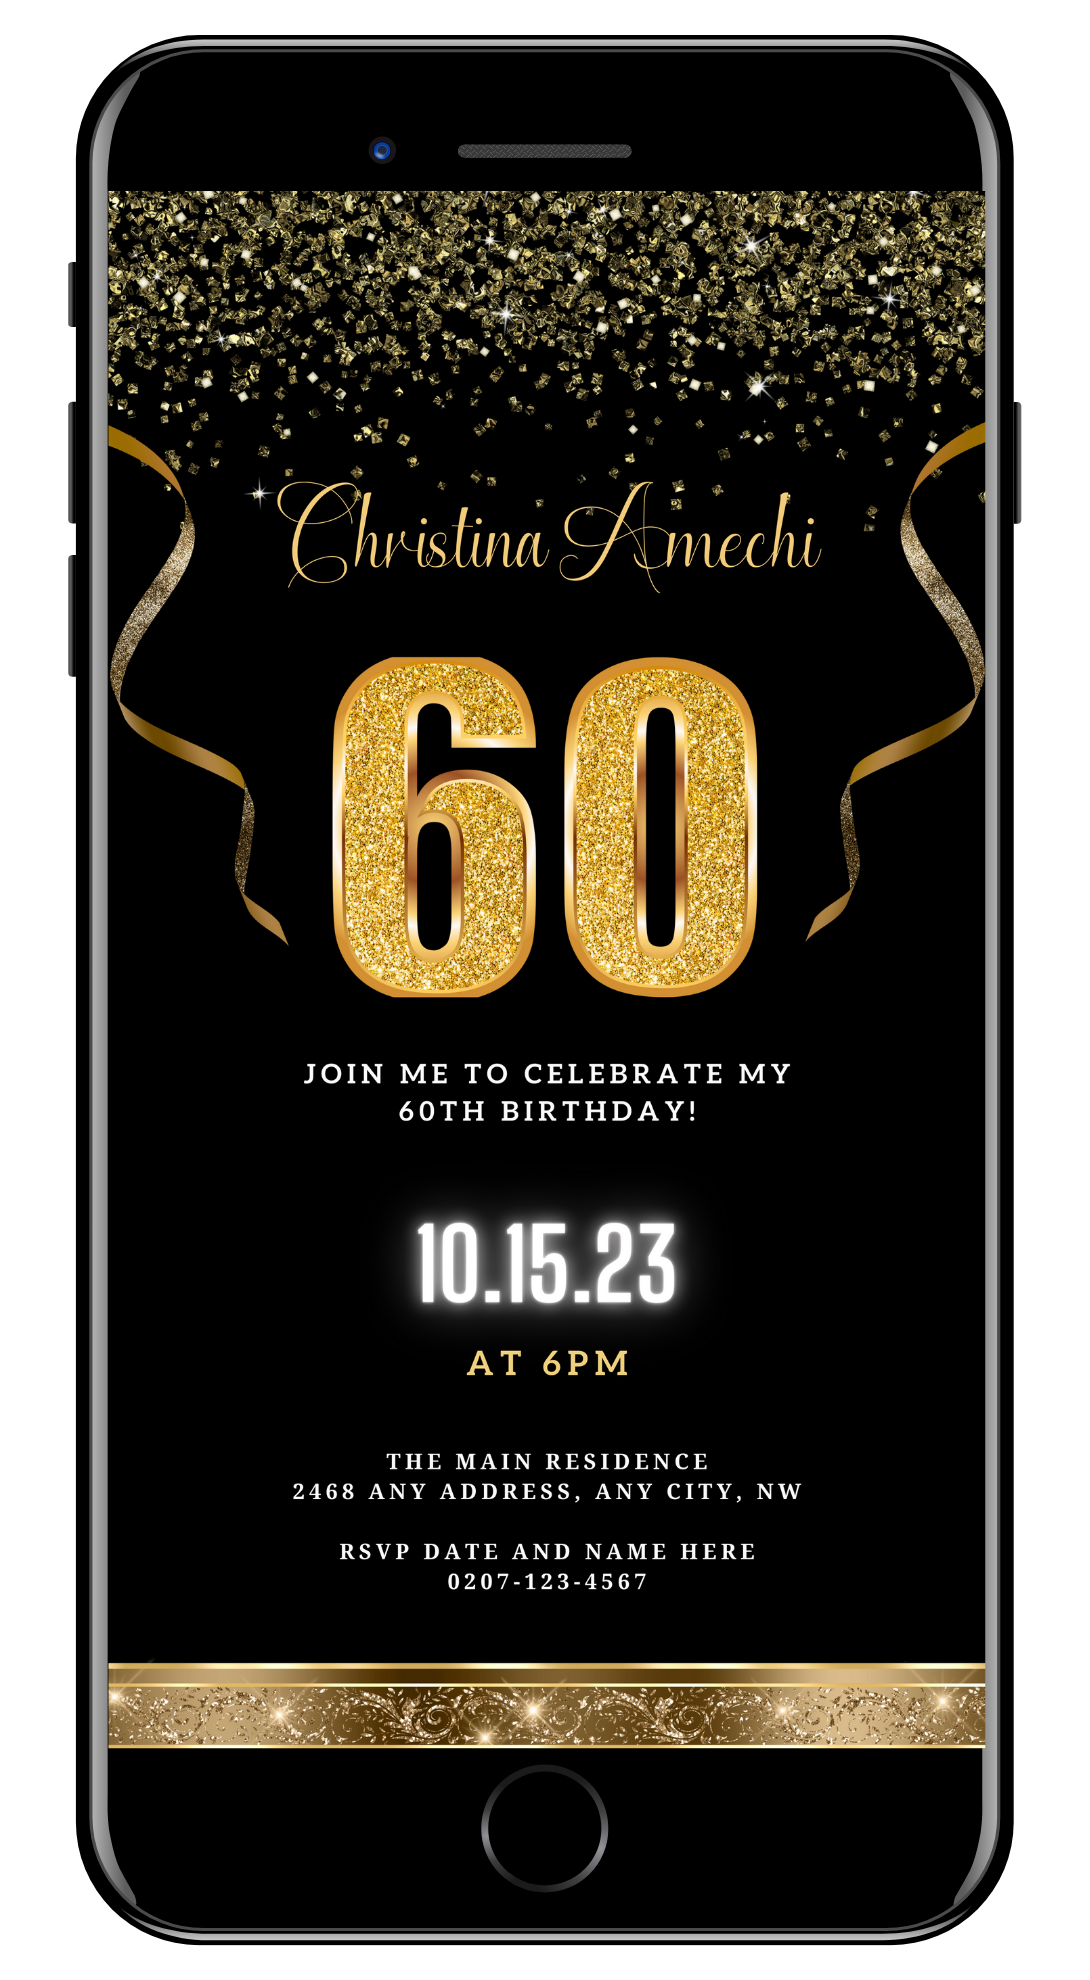 Black Gold Confetti 60th Birthday Evite featuring customizable gold text and confetti on a black background, optimized for smartphone use with Canva.